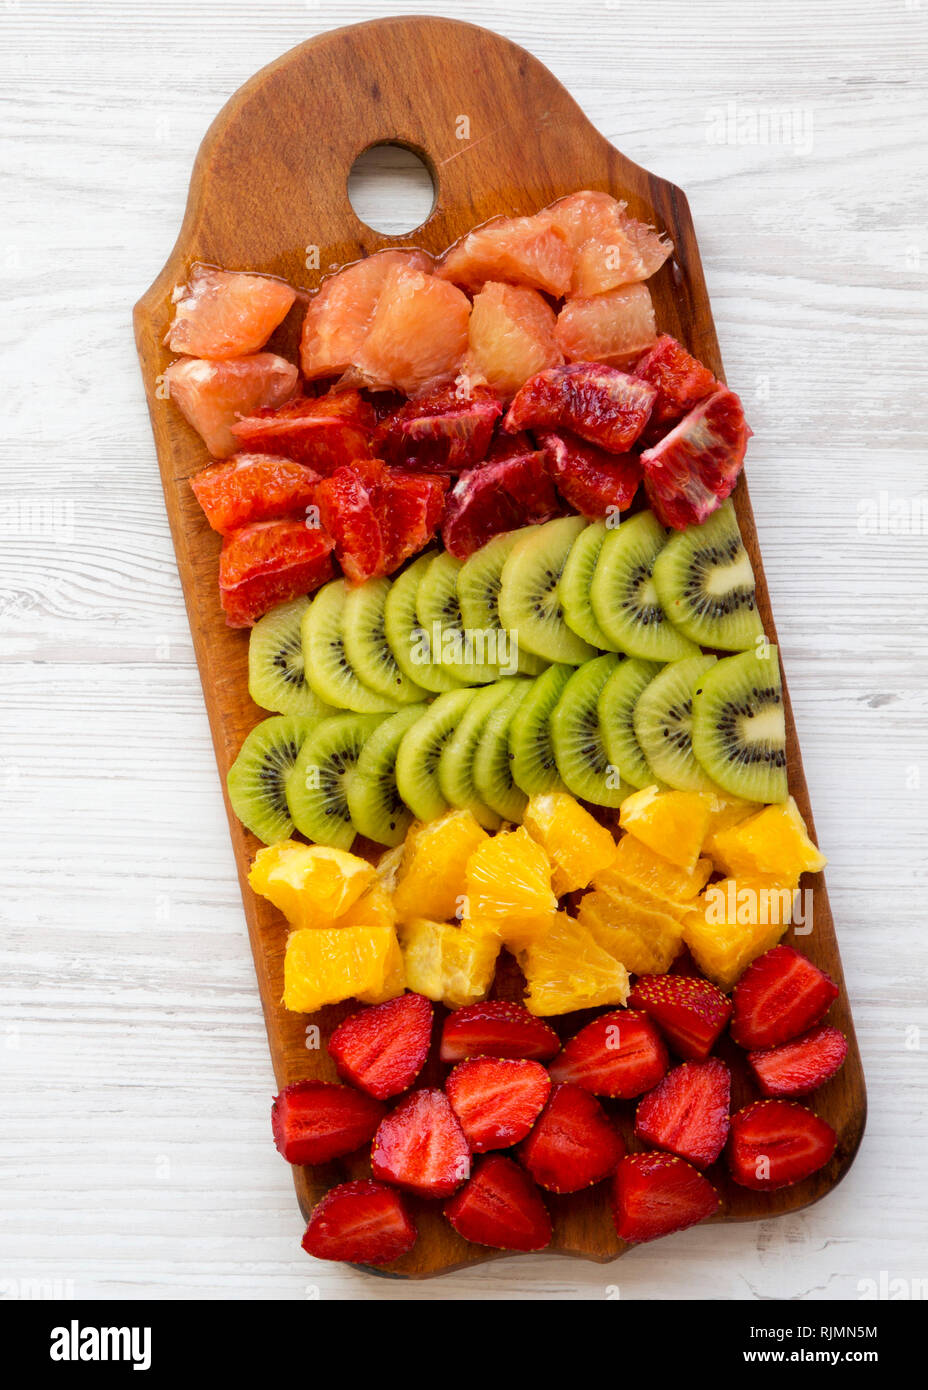 https://c8.alamy.com/comp/RJMN5M/chopped-fresh-fruits-arranged-on-cutting-board-on-white-wooden-surface-top-view-ingredients-for-fruit-salad-from-above-flat-lay-overhead-RJMN5M.jpg